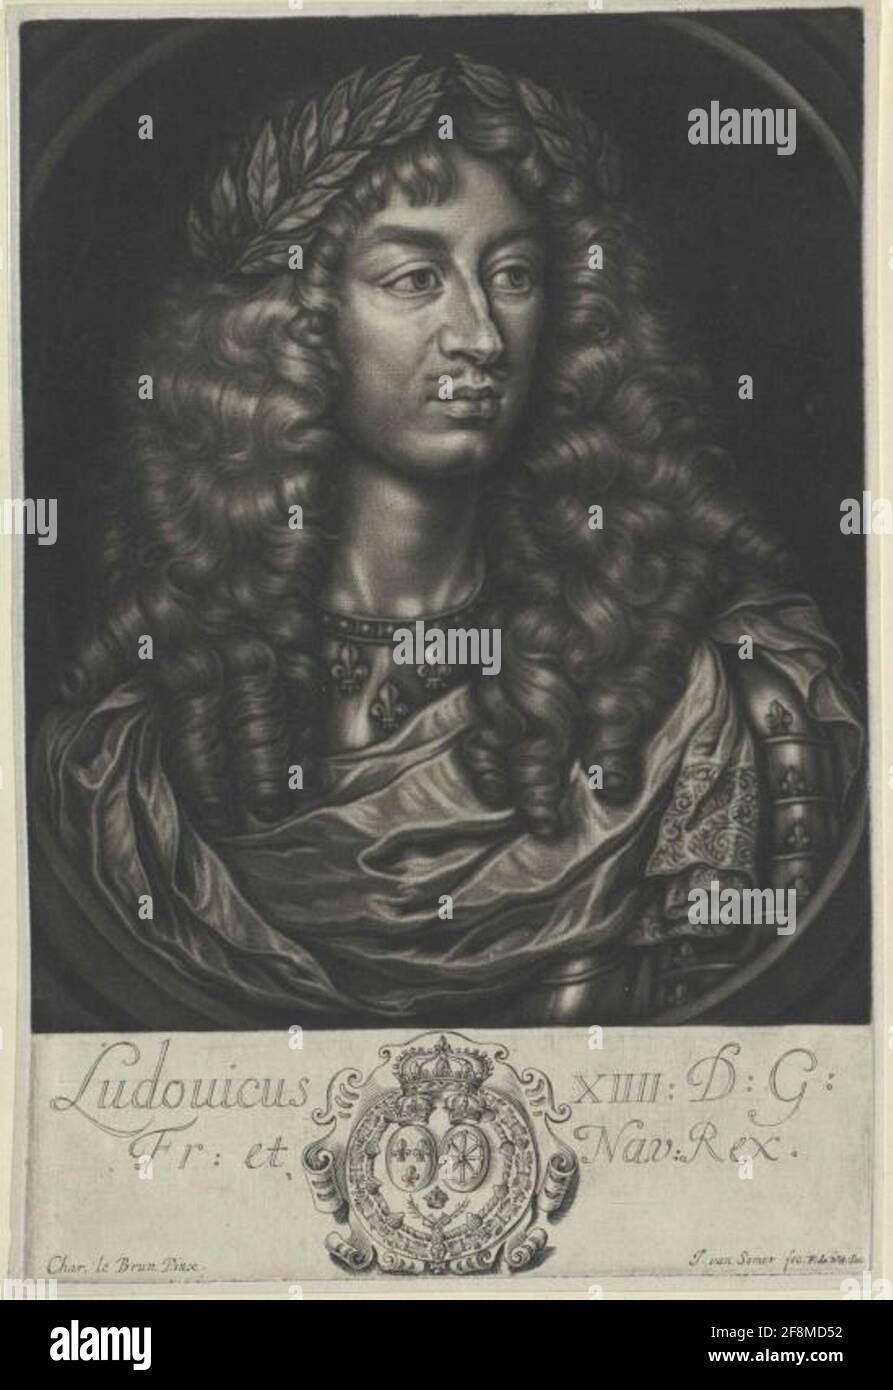 Ludwig Xiv., King of France painting by Charles Le Brun, played in a scrape of Jan van Somer Stock Photo